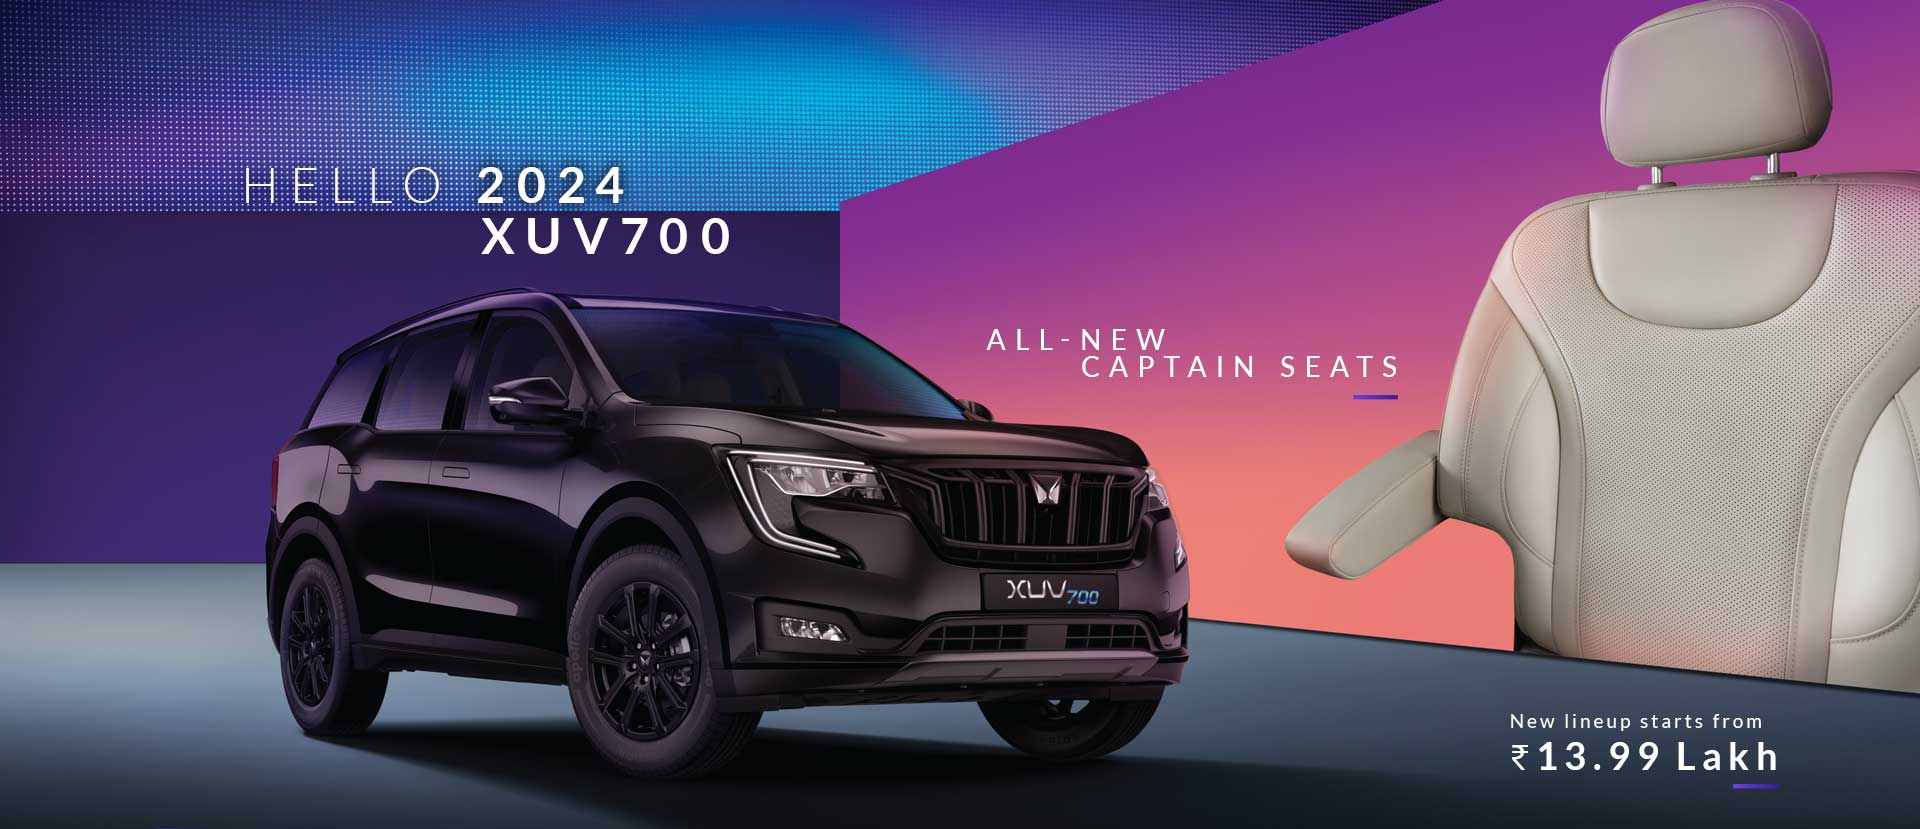 All New Captain Seats in XUV700, Comfortable Seats in XUV700, Spacious Seats in XUV700